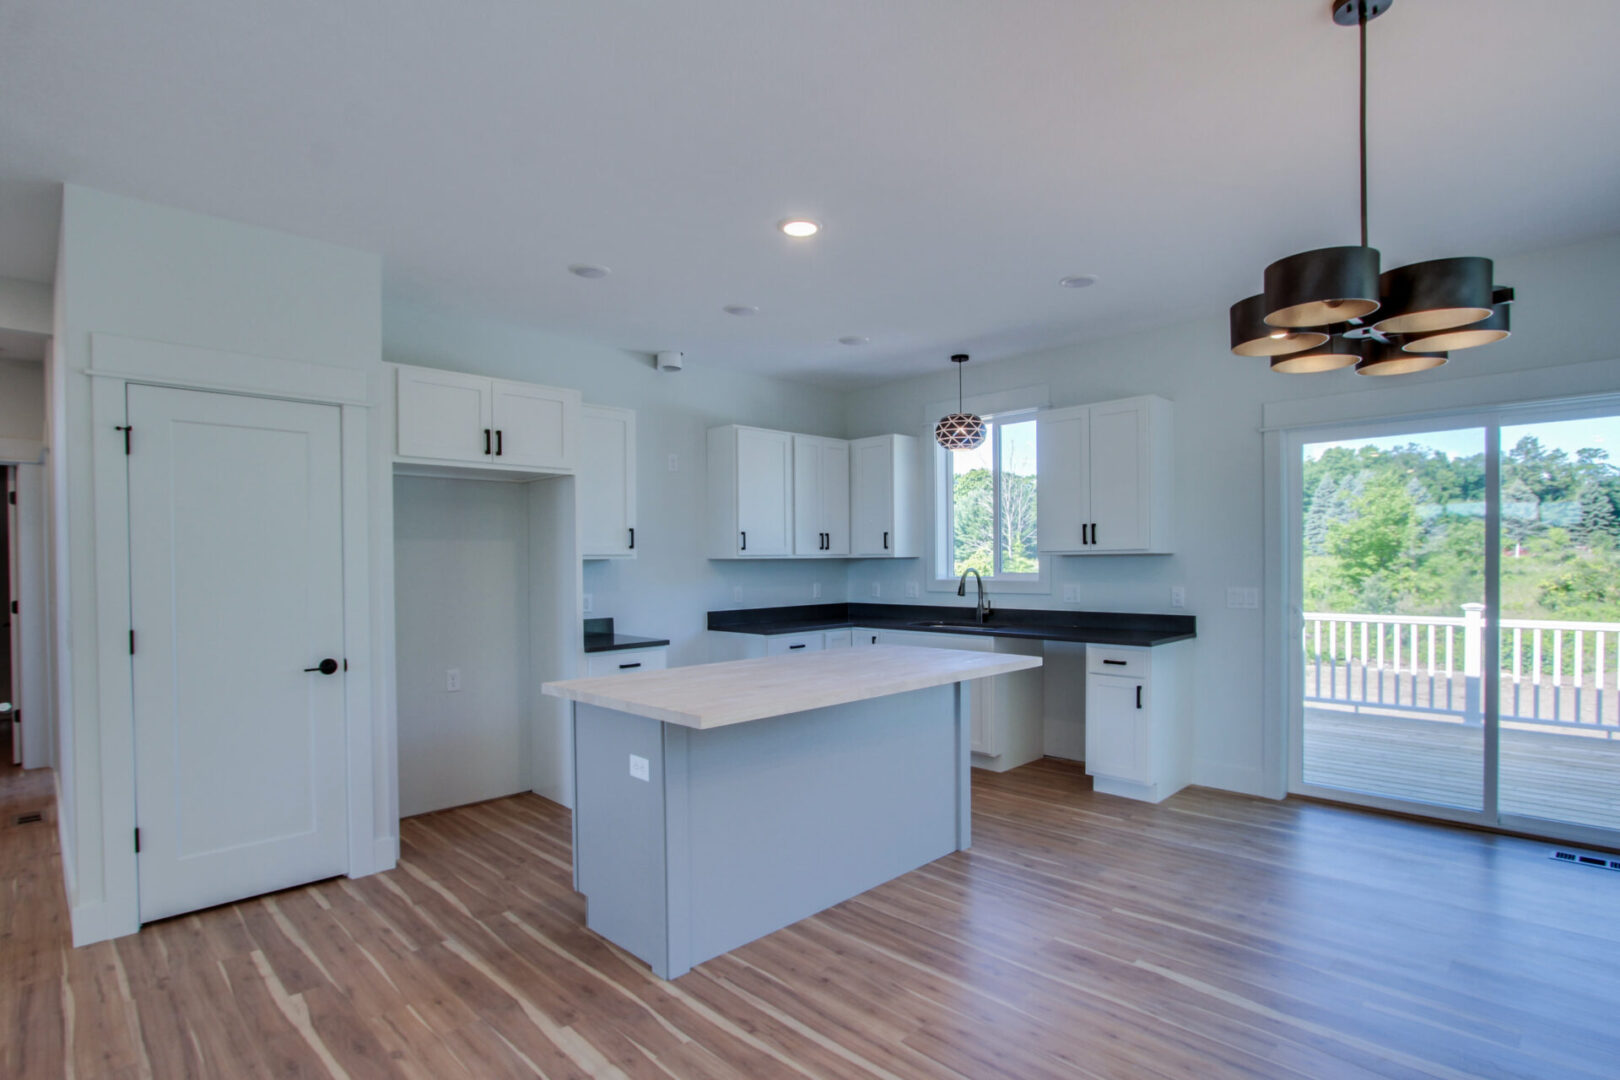 A kitchen with white sink, cabinets, countertops, and more